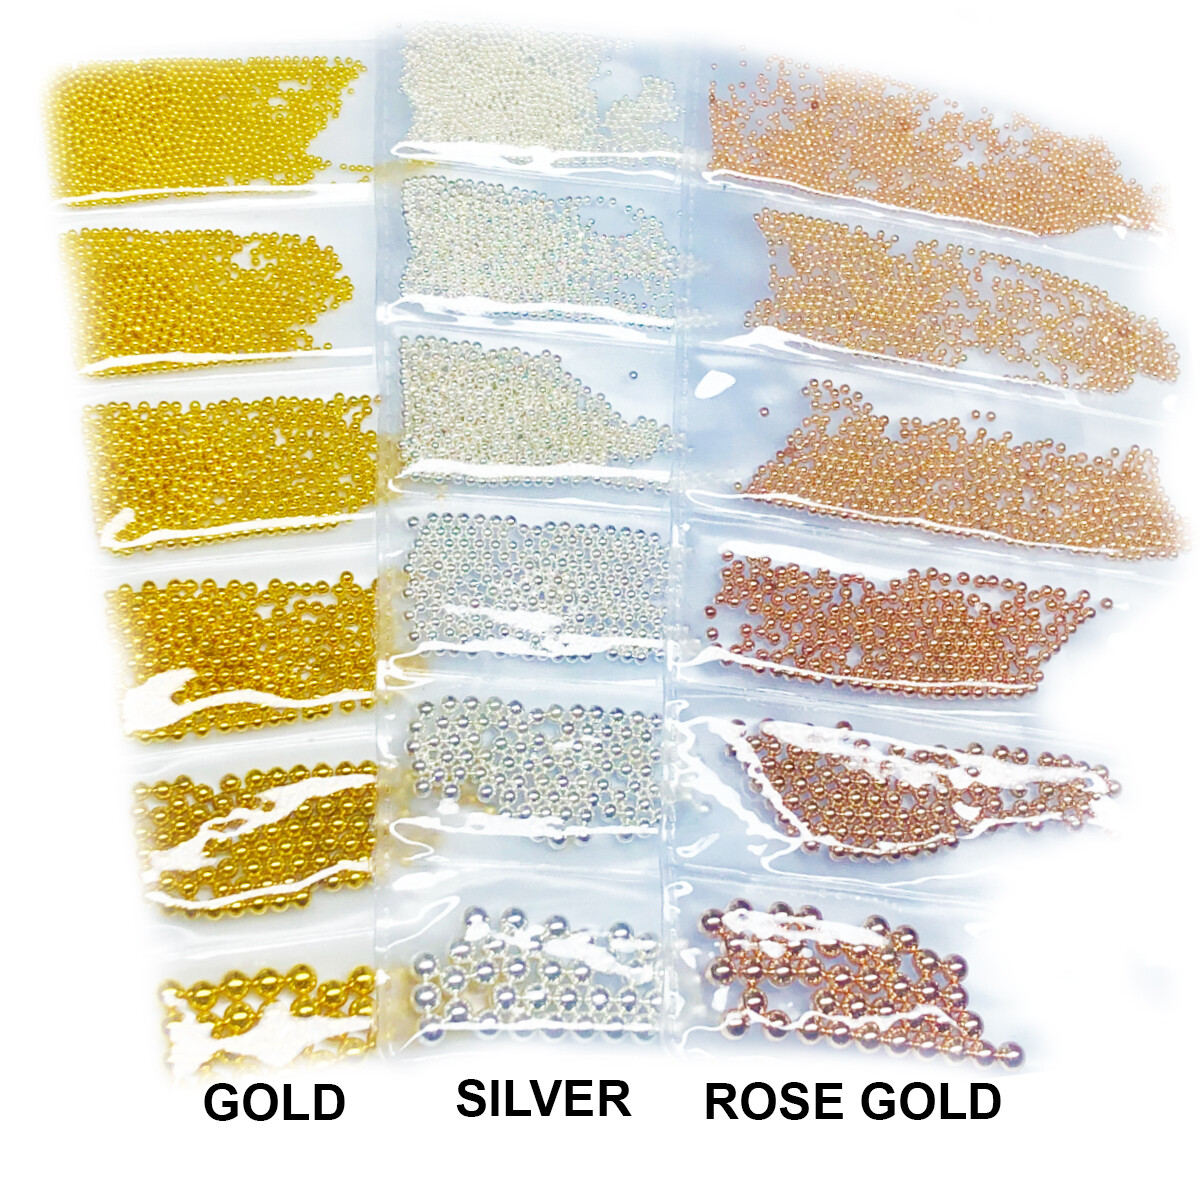 GOLD, SILVER AND ROSE GOLD NAIL ART BEADS 3 PACKS